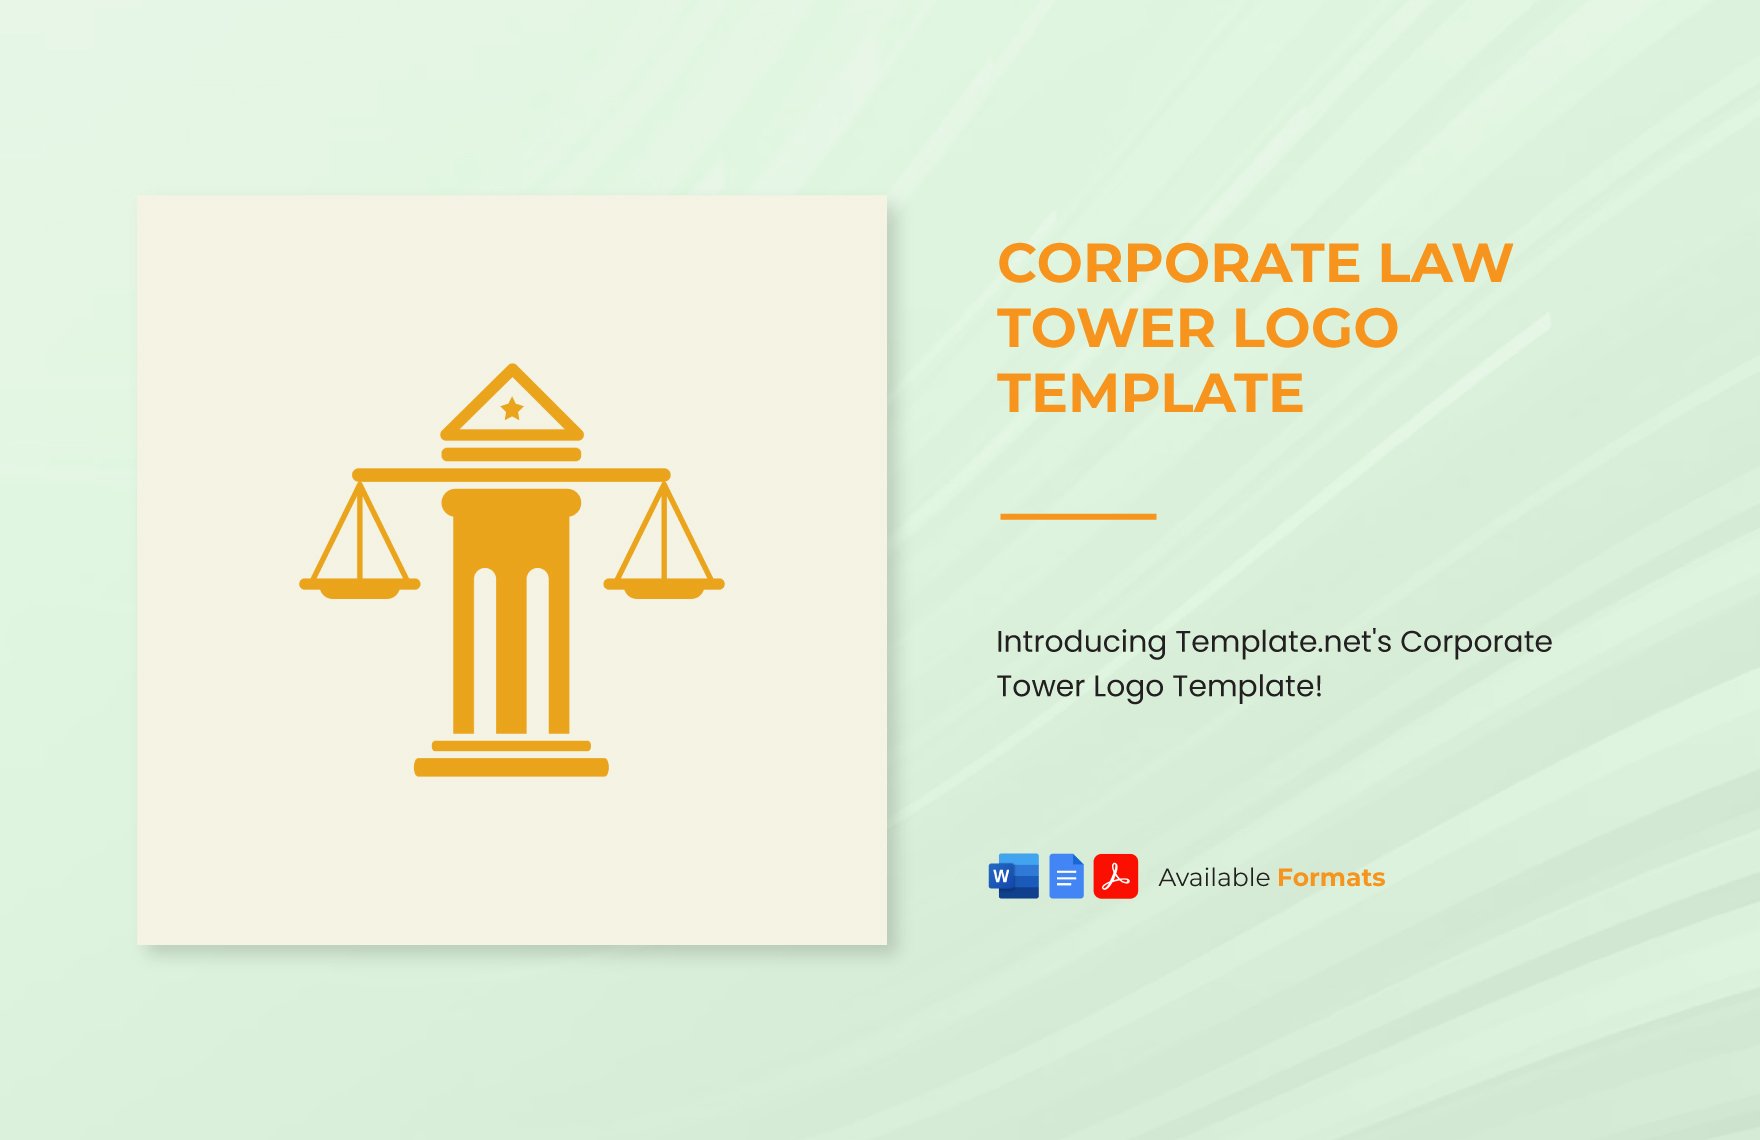 Free Corporate Law Tower Logo Template in Word, Google Docs, PDF